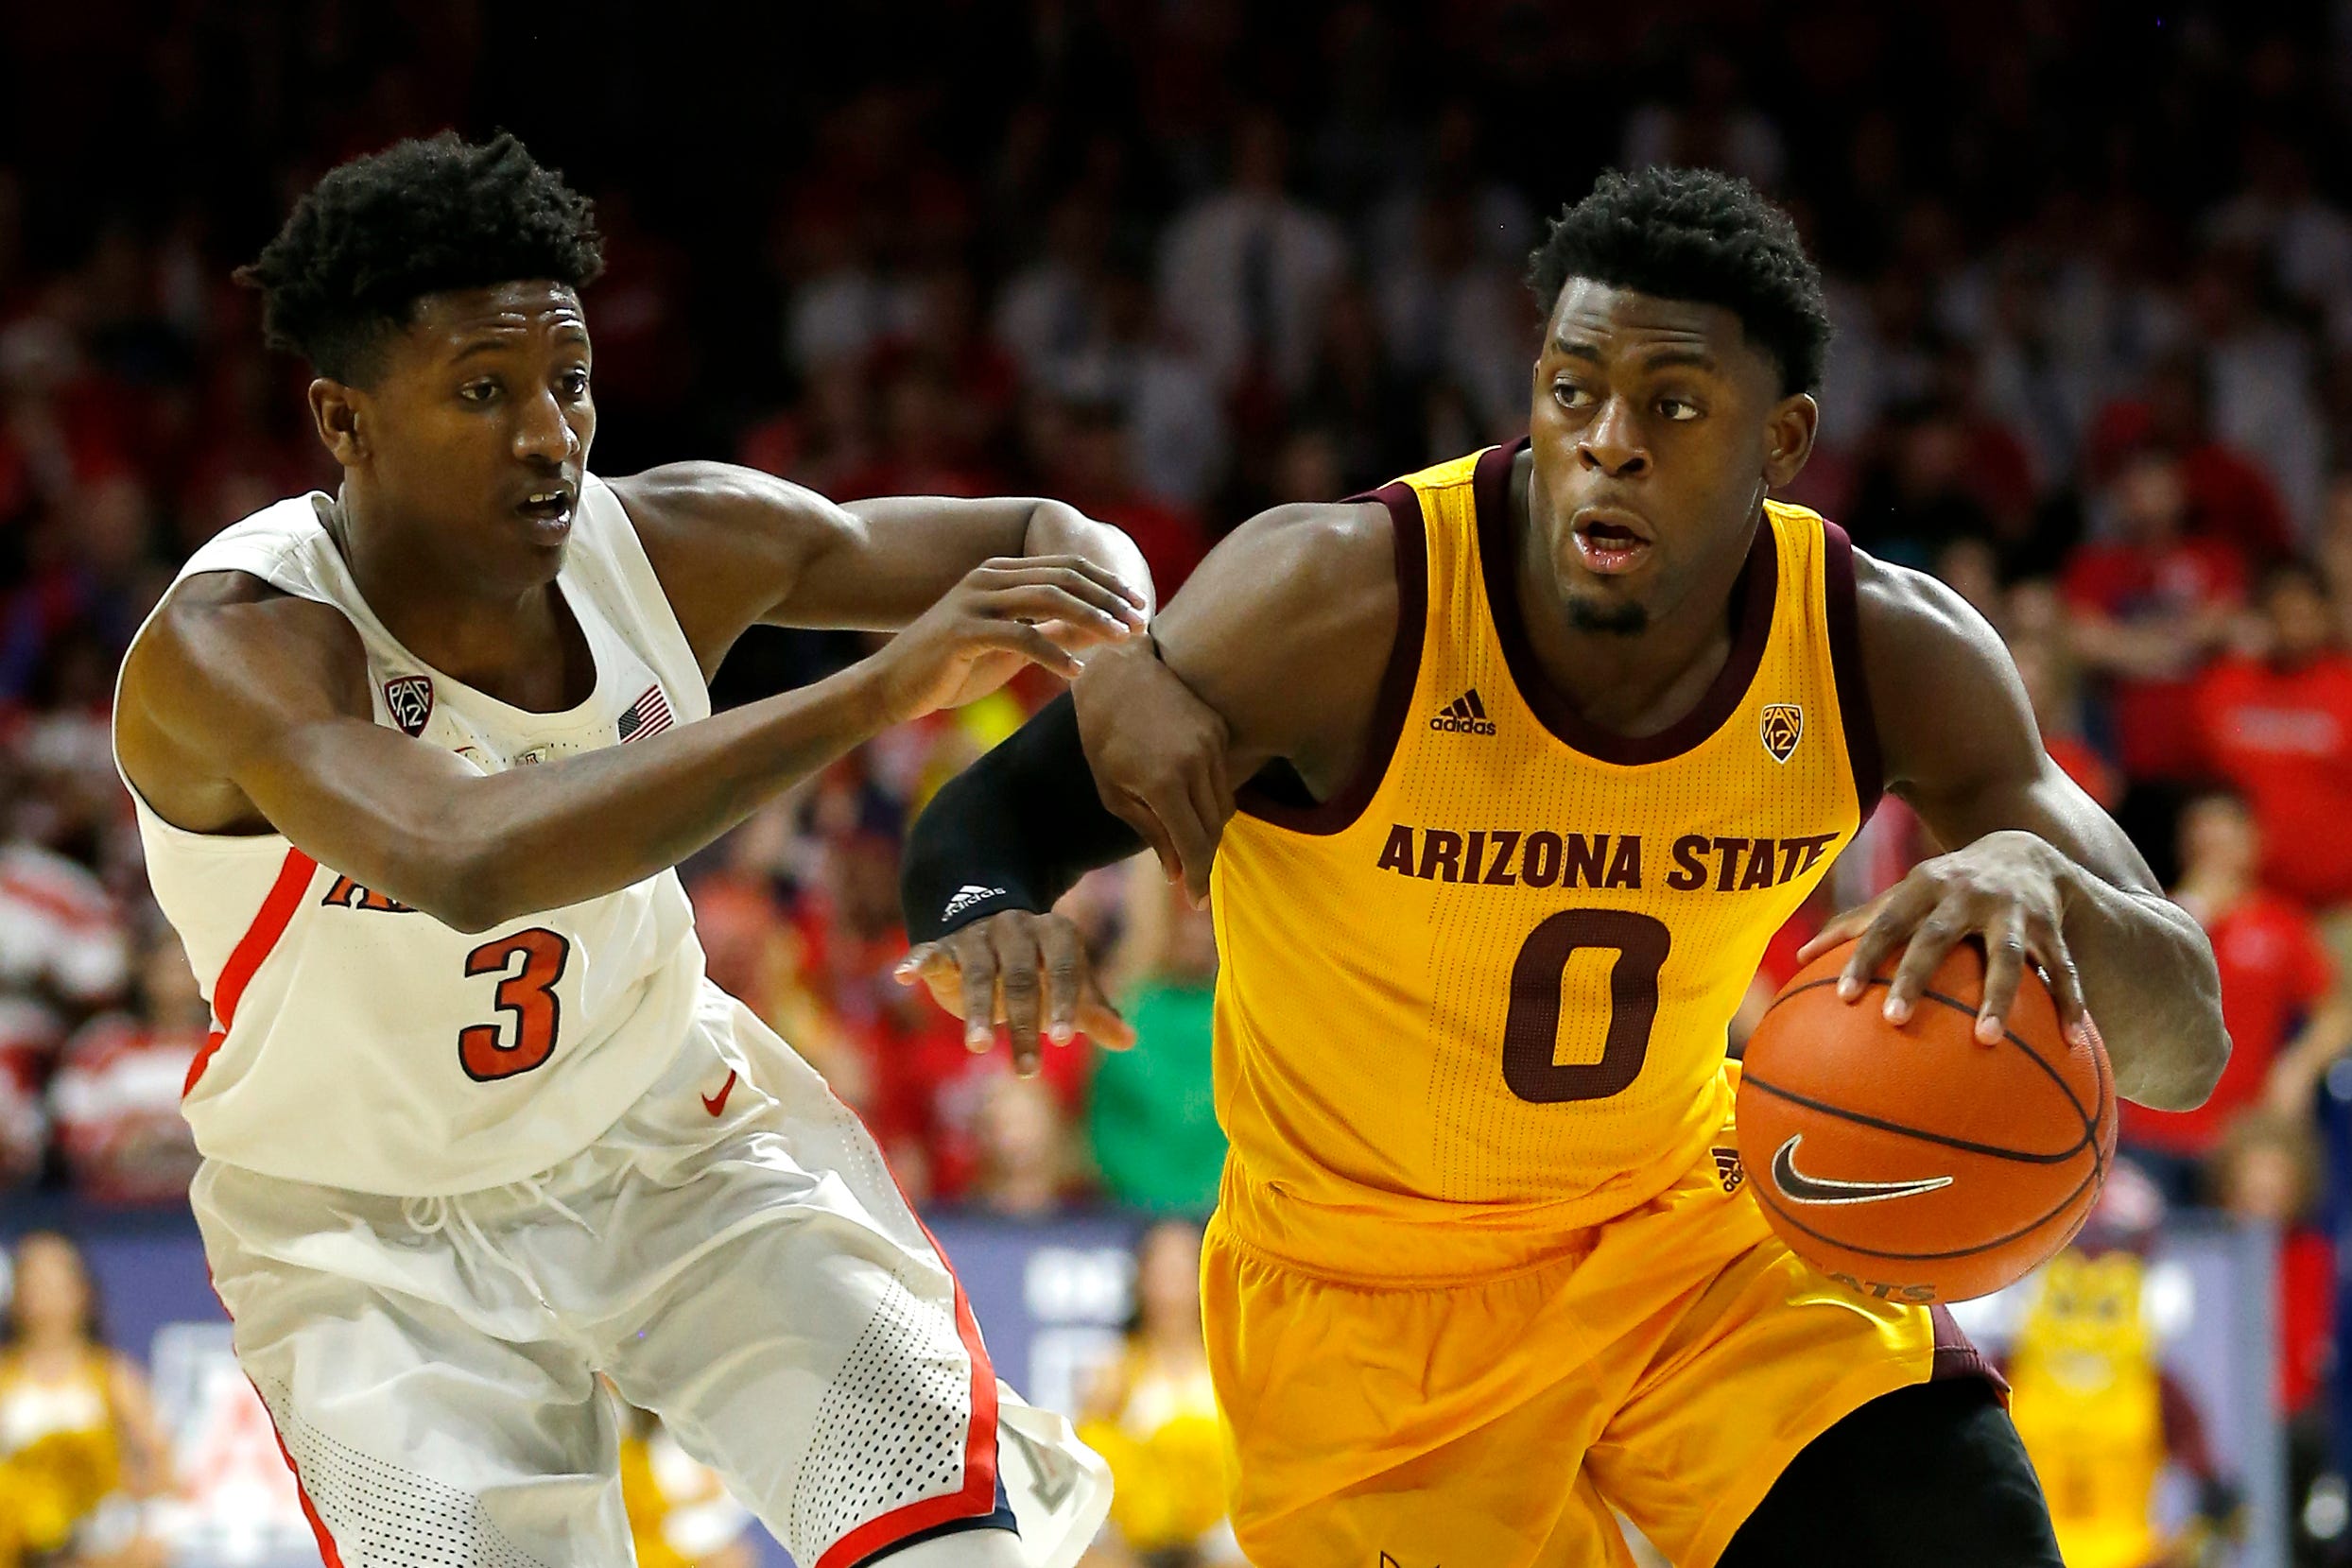 24. Philadelphia 76ers: Luguentz Dort, guard, Arizona State. The Sixers still have some decisions to make about their roster construction in taking another shot at a longer run in the playoffs. They can just stockpile talent and Dort is a good two-way player who could help them immediately.